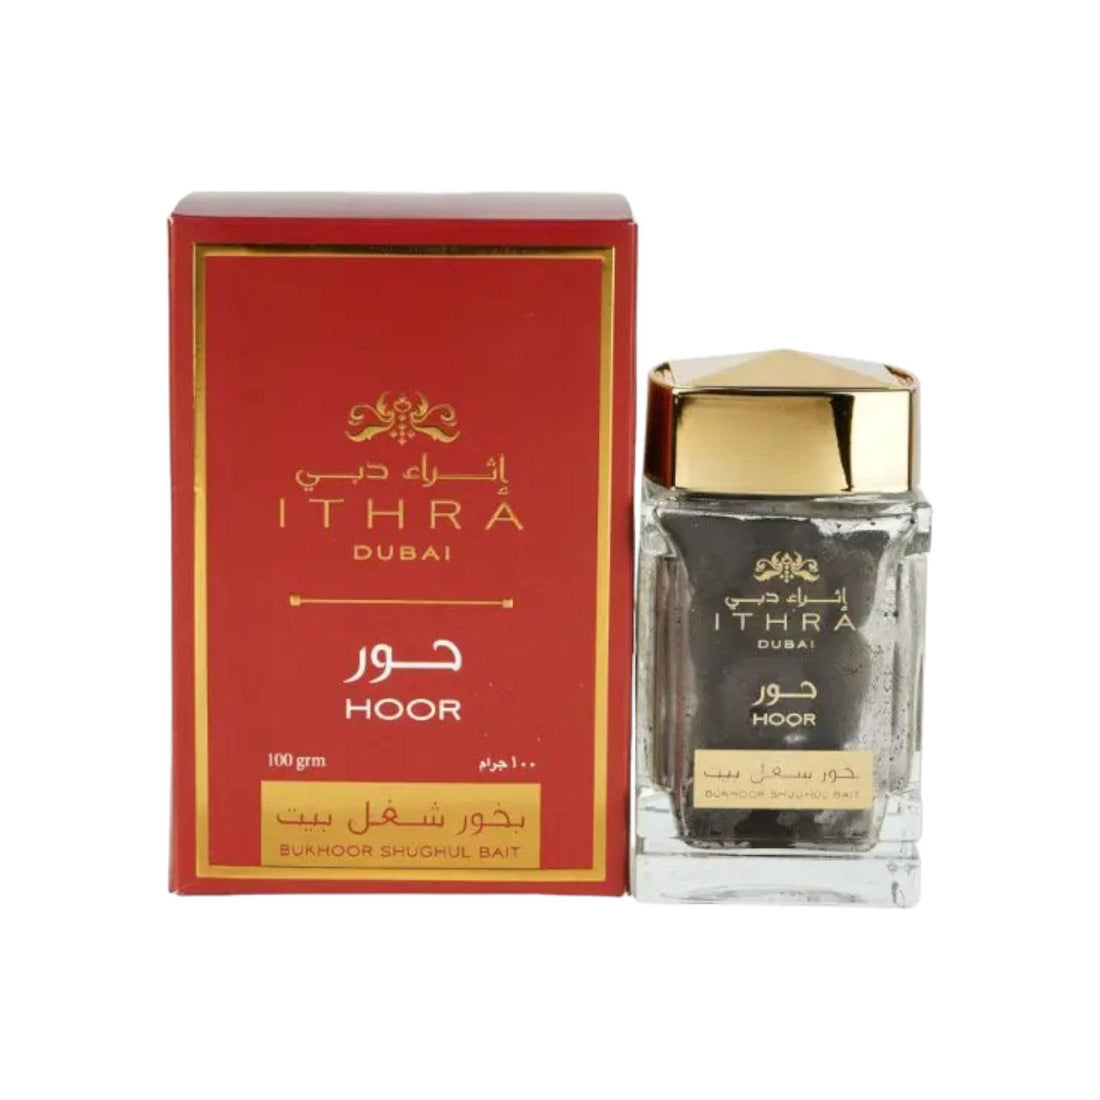 Pack of Hoor Bakhoor 100g by Ithra Dubai, a luxurious and uniquely scented home fragrance for enhancing indoor ambiance.